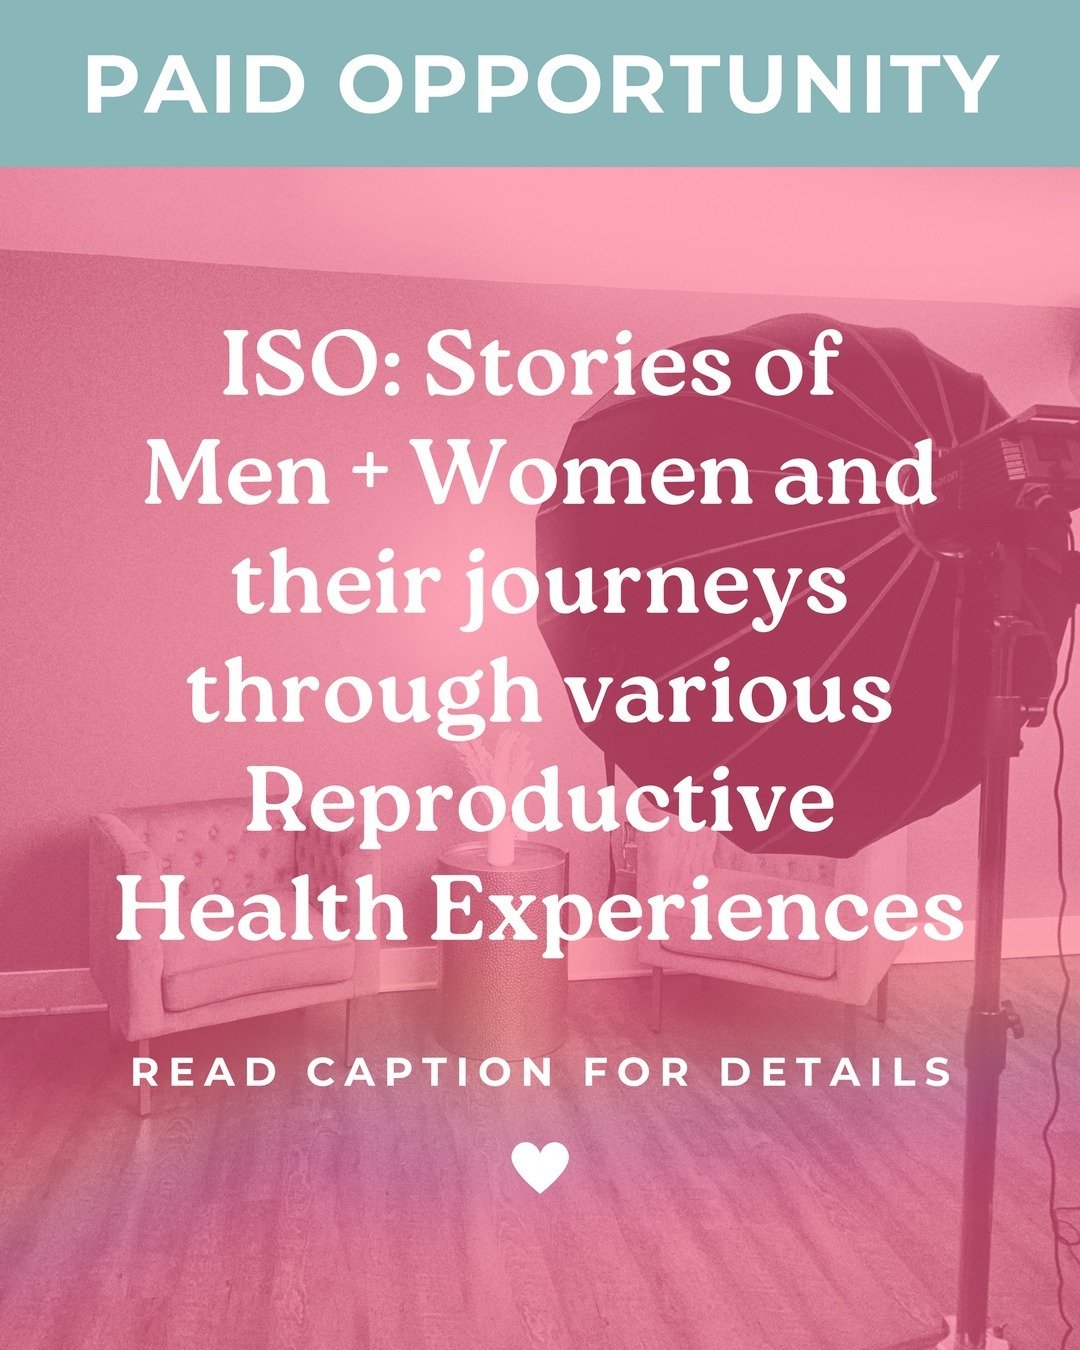 🌟 𝗣𝗔𝗜𝗗 𝗢𝗣𝗣𝗢𝗥𝗧𝗨𝗡𝗜𝗧𝗬: Are you ready to share your journey in reproductive health? We're calling on people of color, including men, who play a vital yet often overlooked role in reproductive health discussions.

🔗 SIGN UP: https://forms